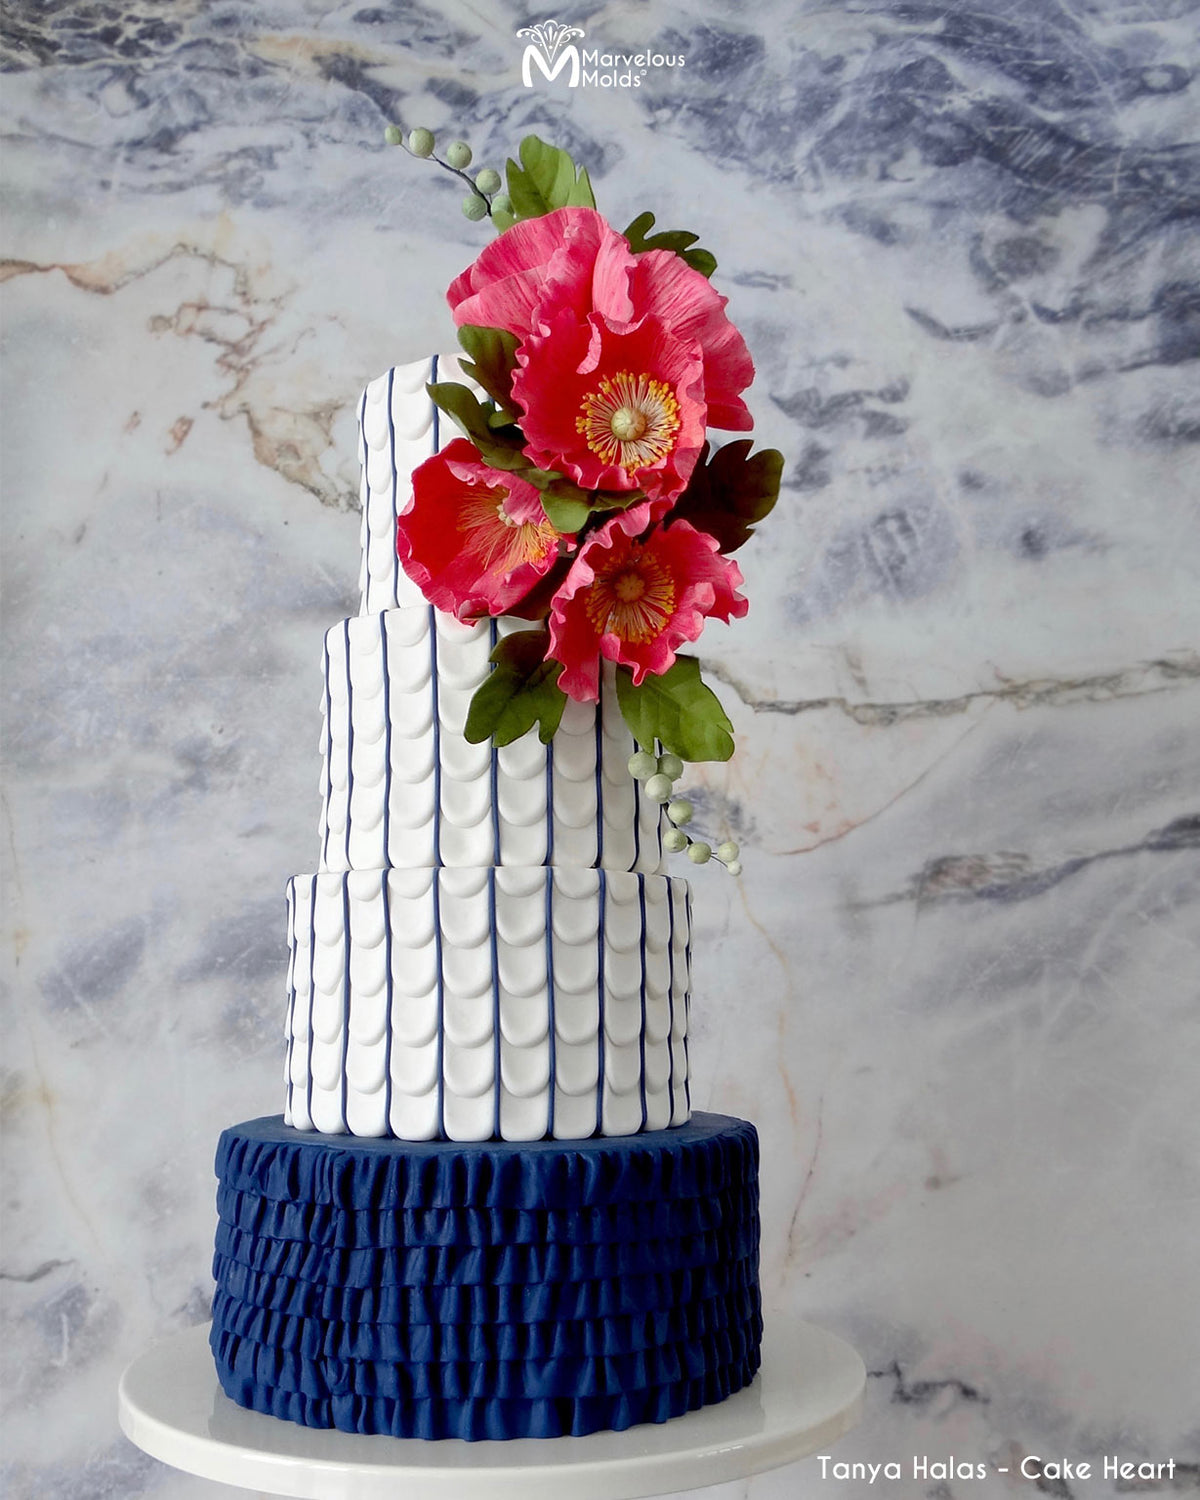 White and Navy Wedding Cake Decorated with Marvelous Molds Perfect Petal Pattern Simpress